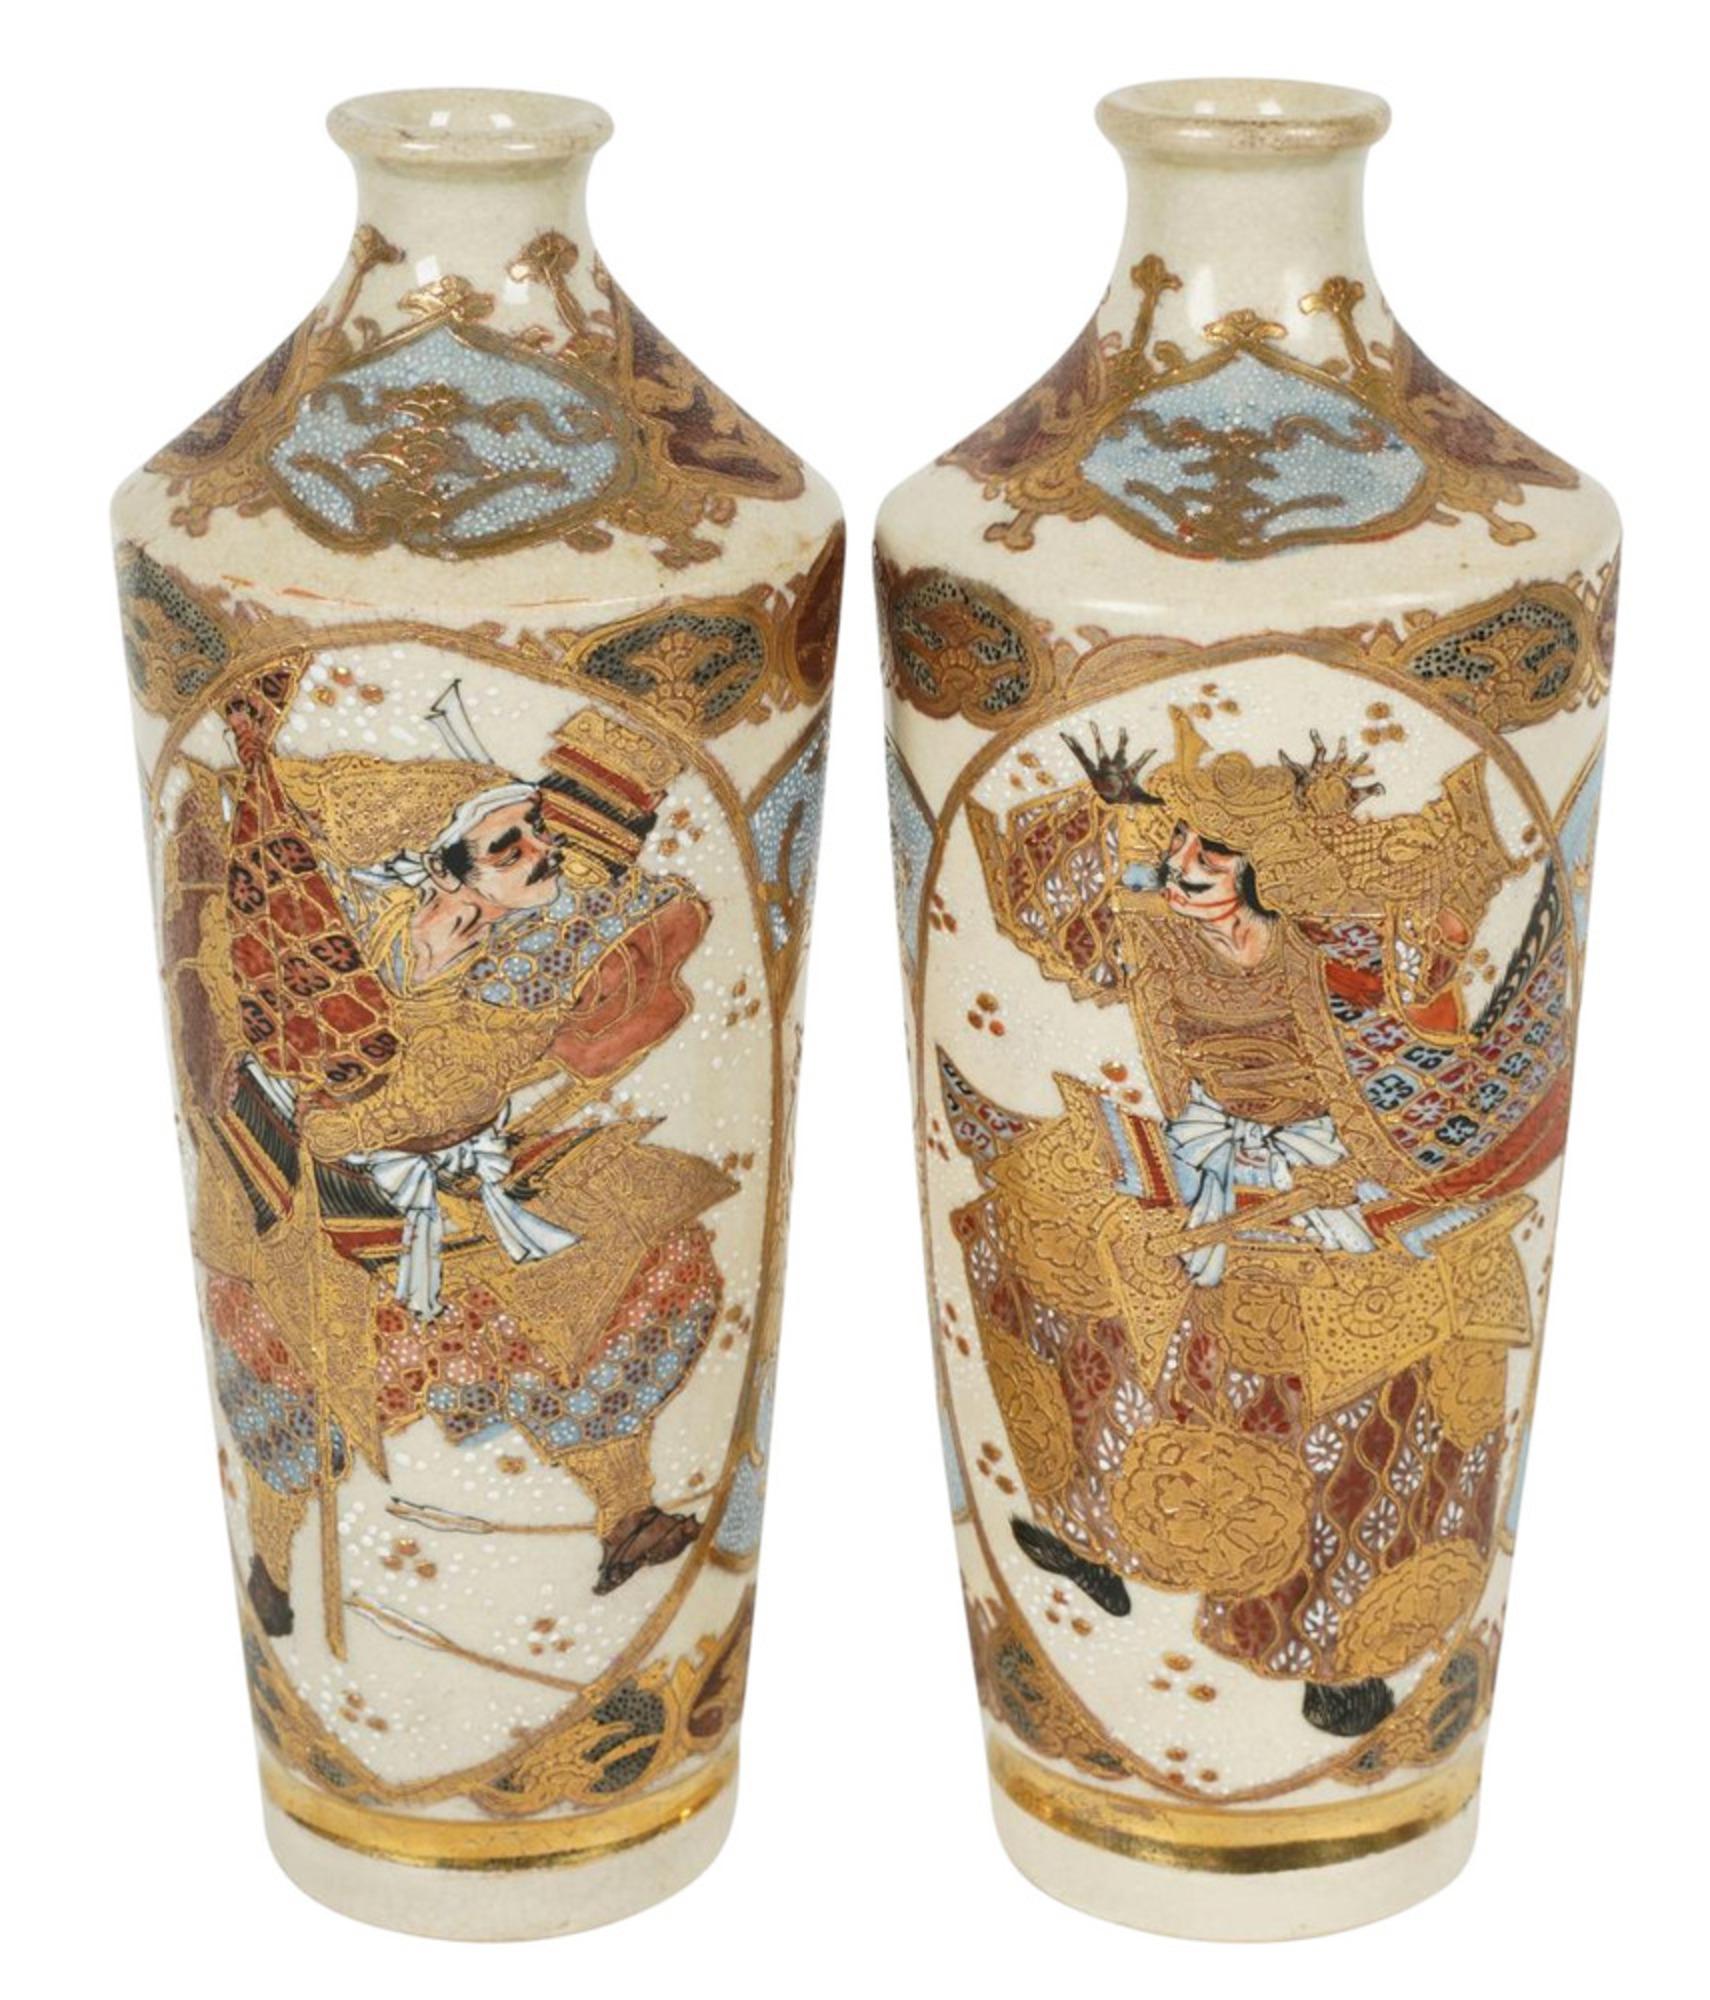 Pair of Delicate satsuma vases. Both are marked, richly decorated, and gilded.
Maybe the Late 19th Century?
Behold the refined warriors, immortalized in stunning detail. Their strength and skill are captured for eternity in this magnificent